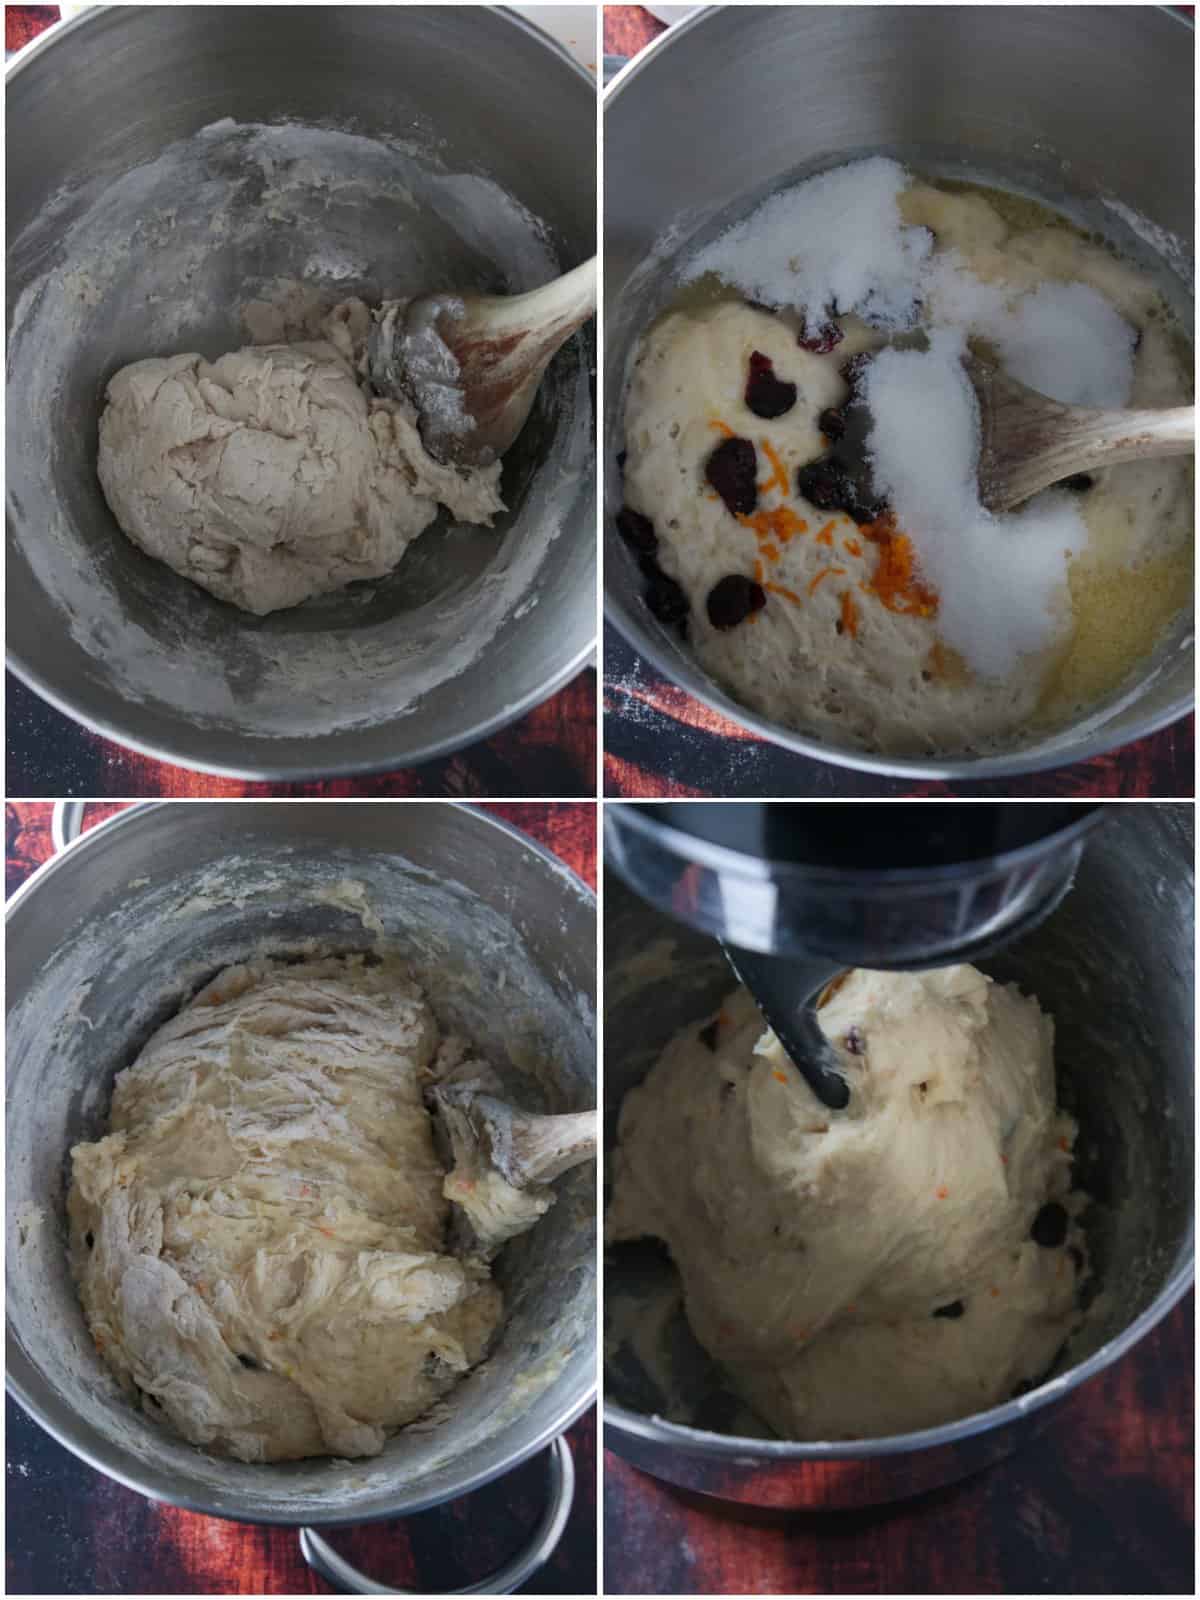 A collage showing the process of making the bread dough for the Greek bread.